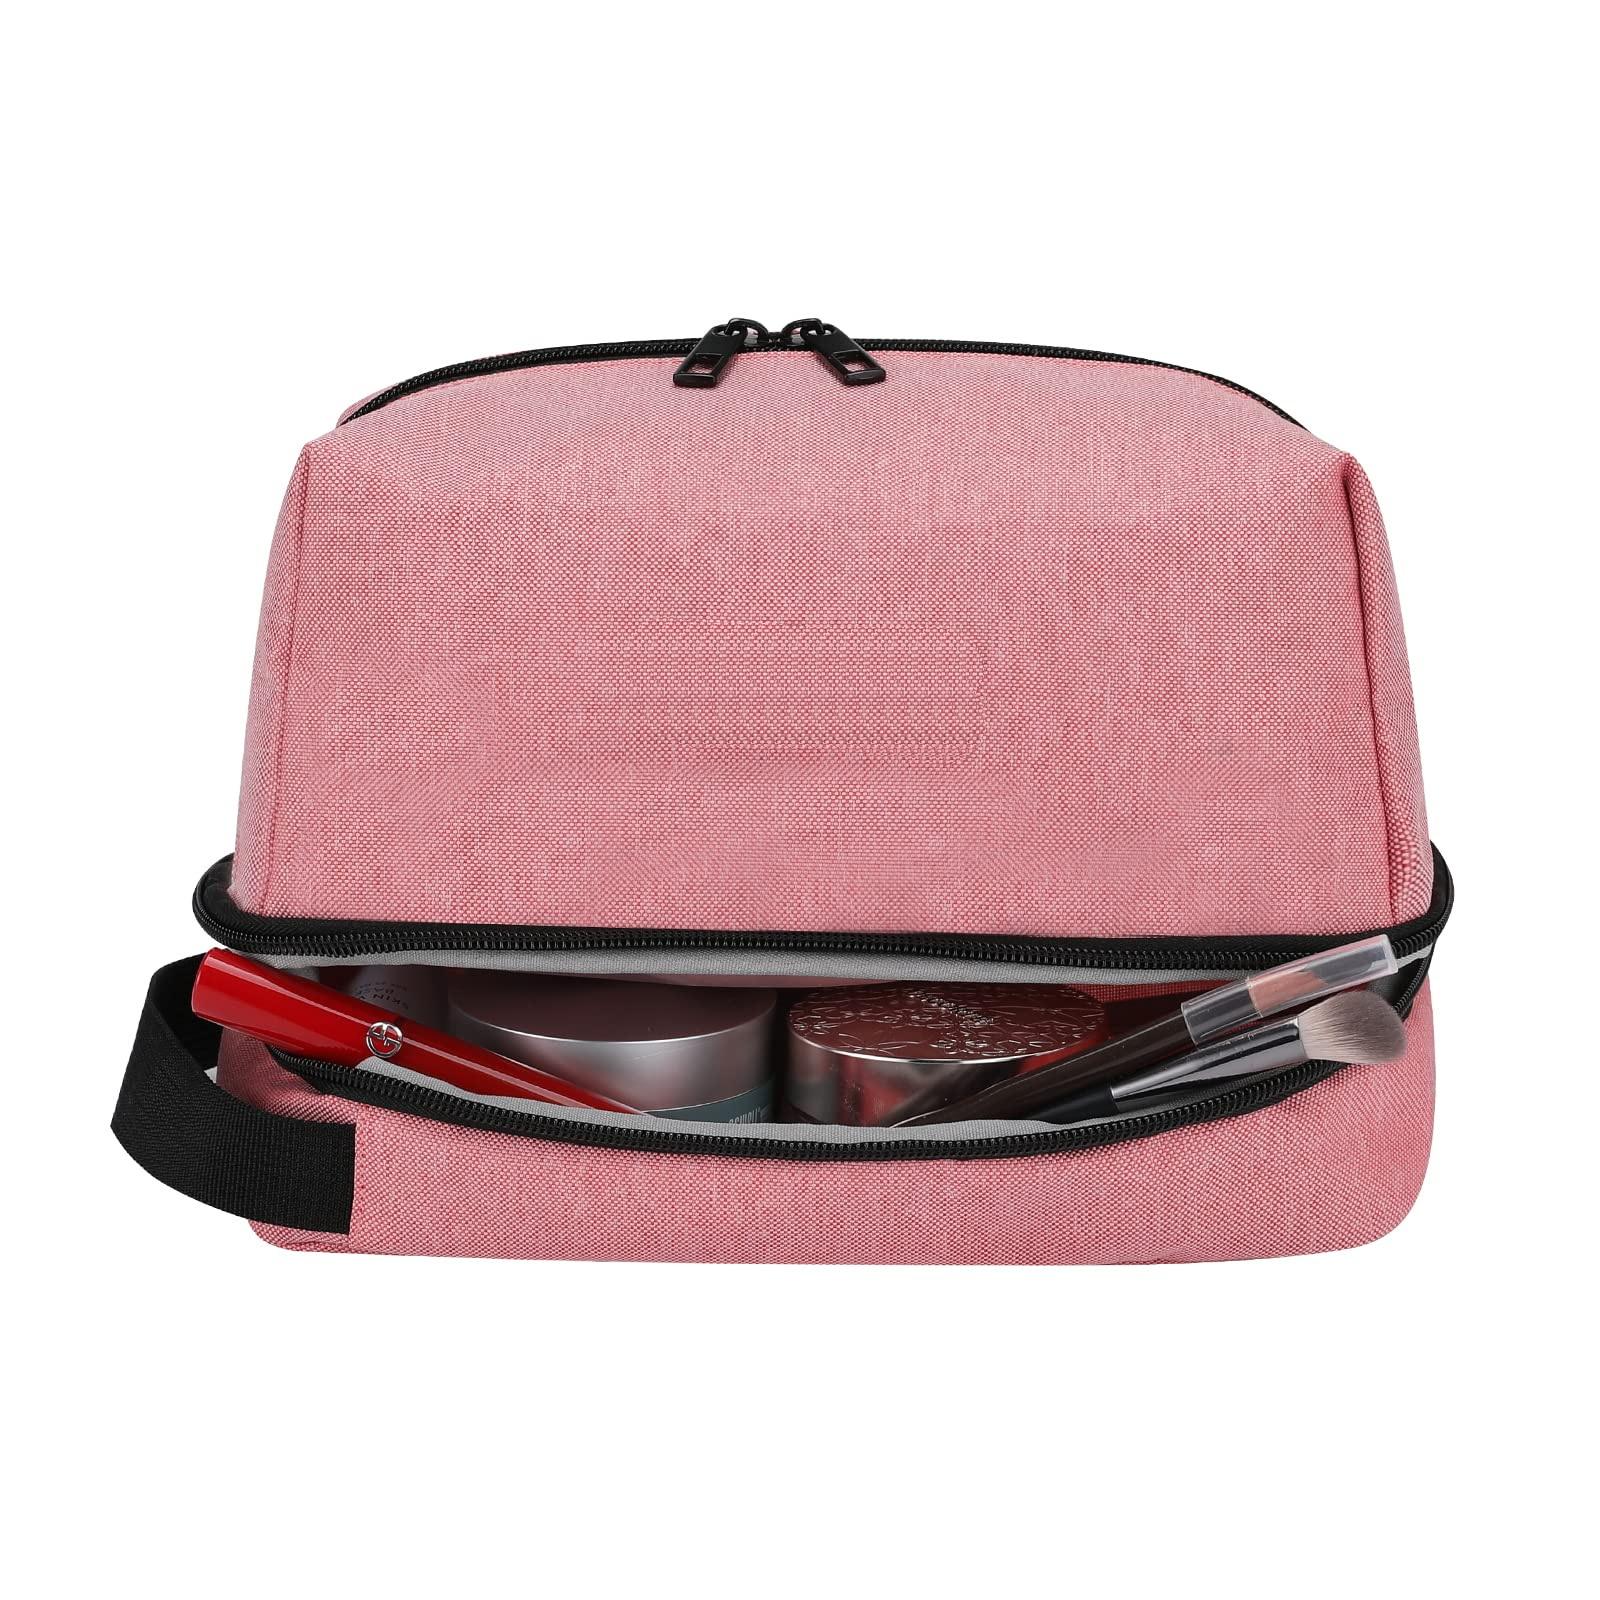 Travel Toiletry Bag Double Compartments Cosmetics Bag Toiletry Organizer Bag Hanging